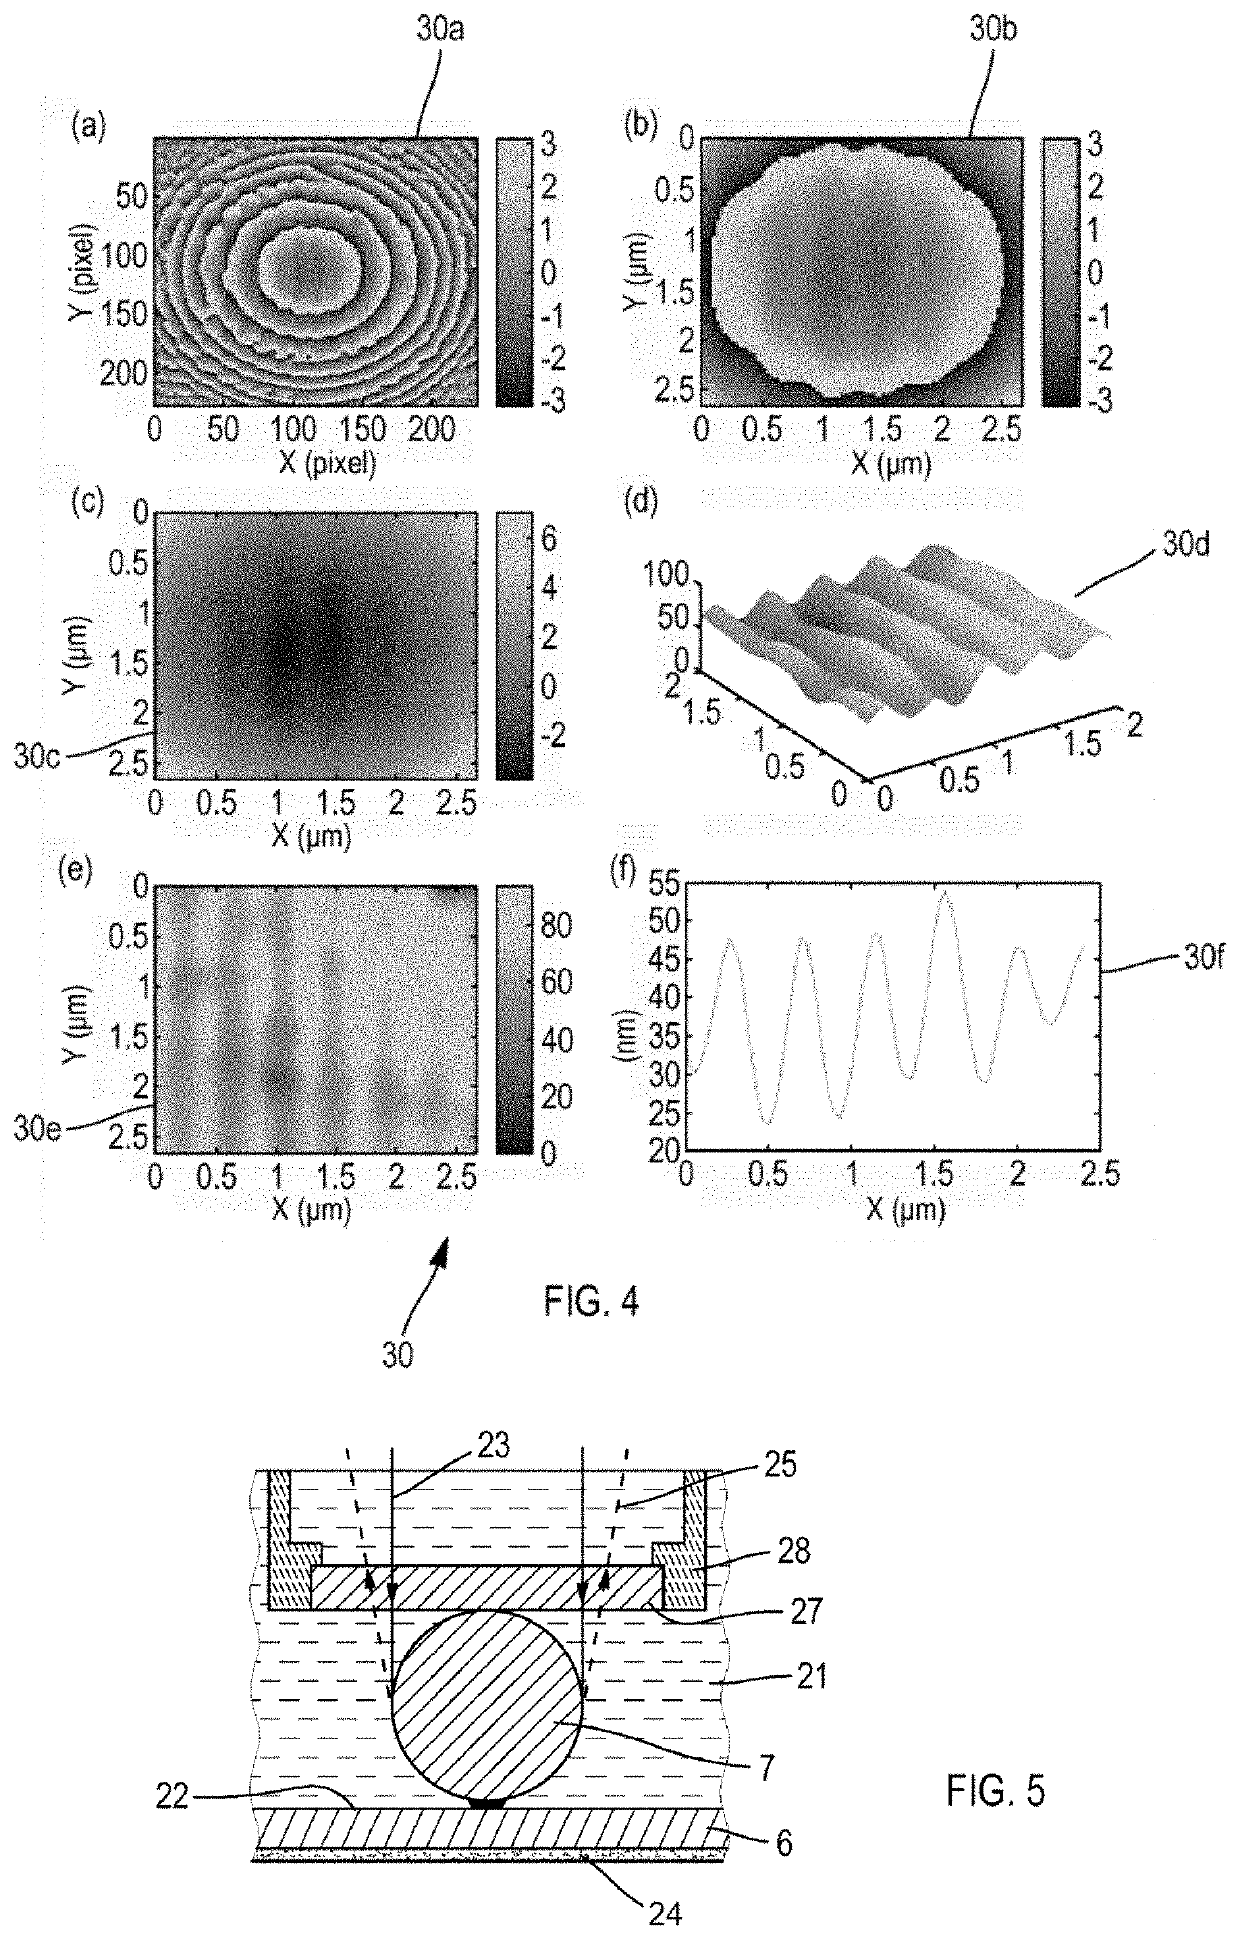 System and method for super-resolution full-field optical metrology on the far-field nanometre scale